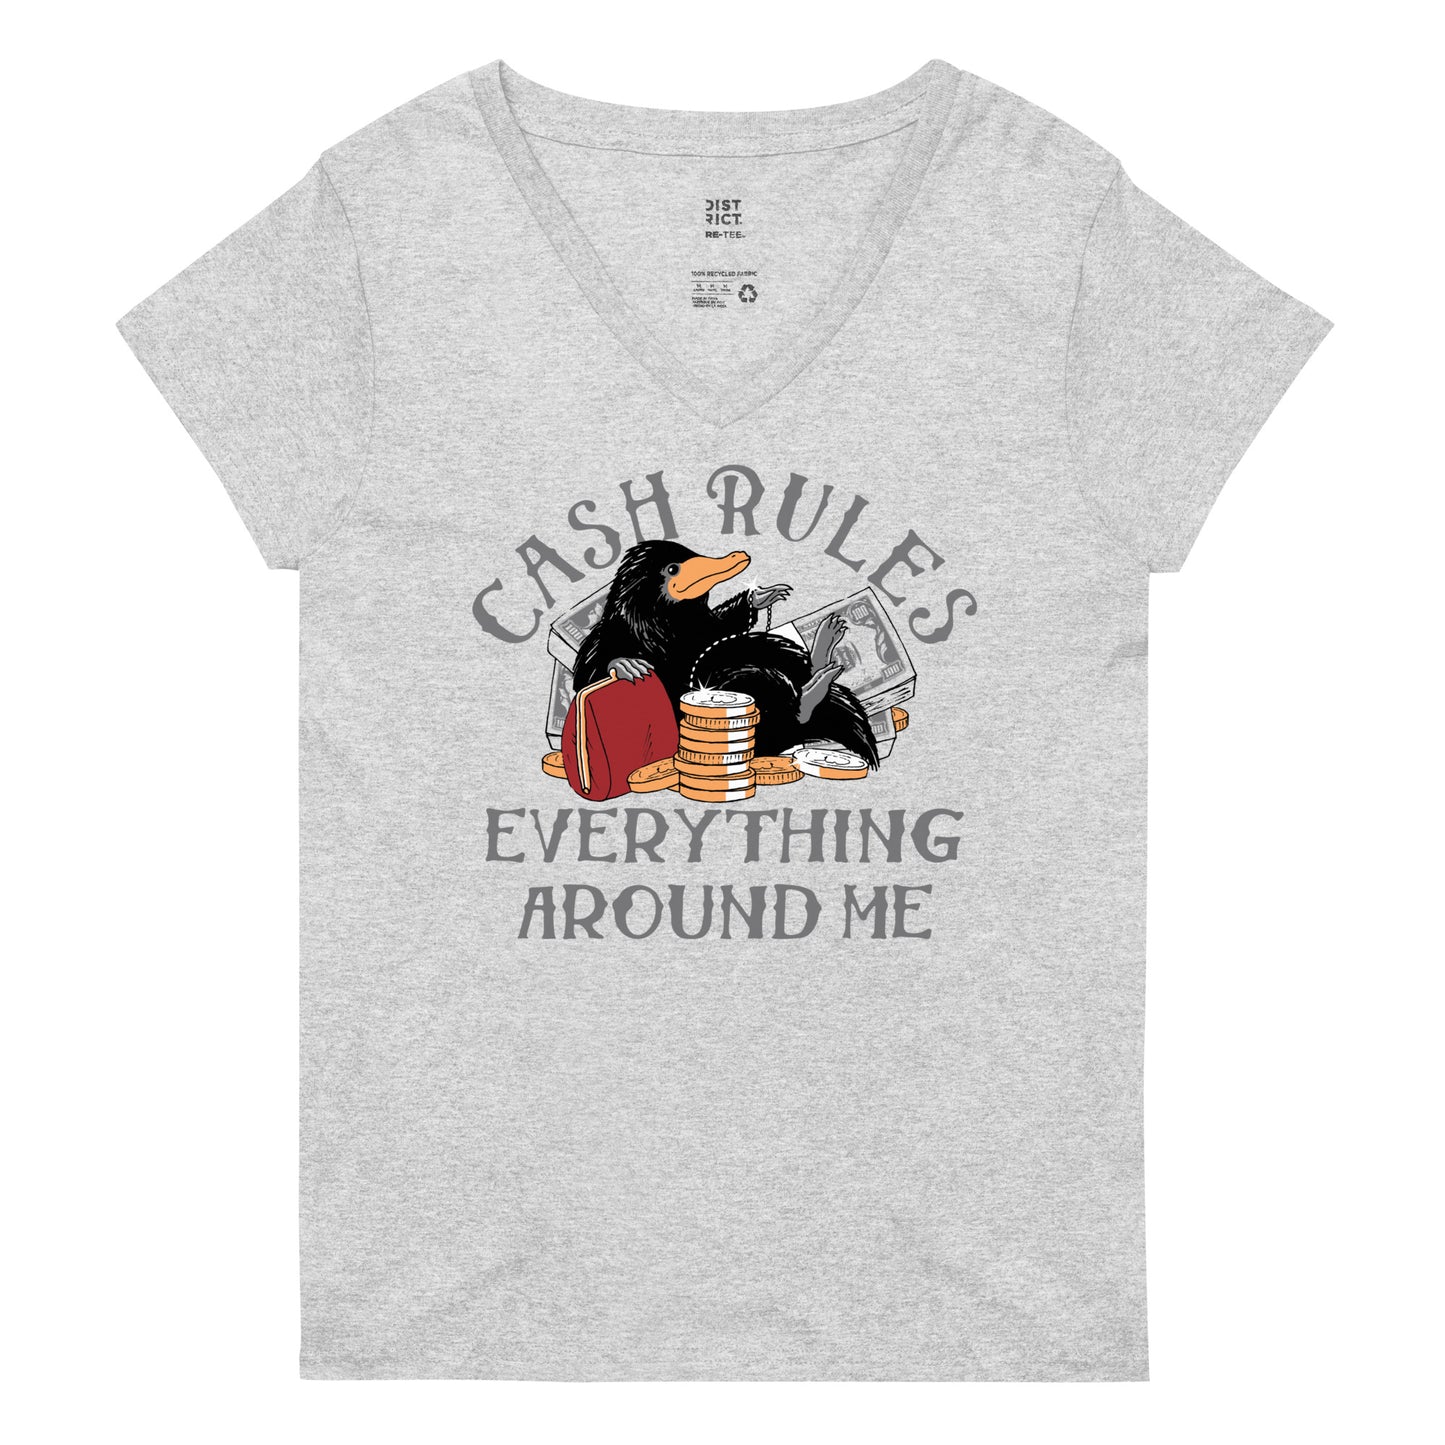 Cash Rules Everything Around Me Women's V-Neck Tee